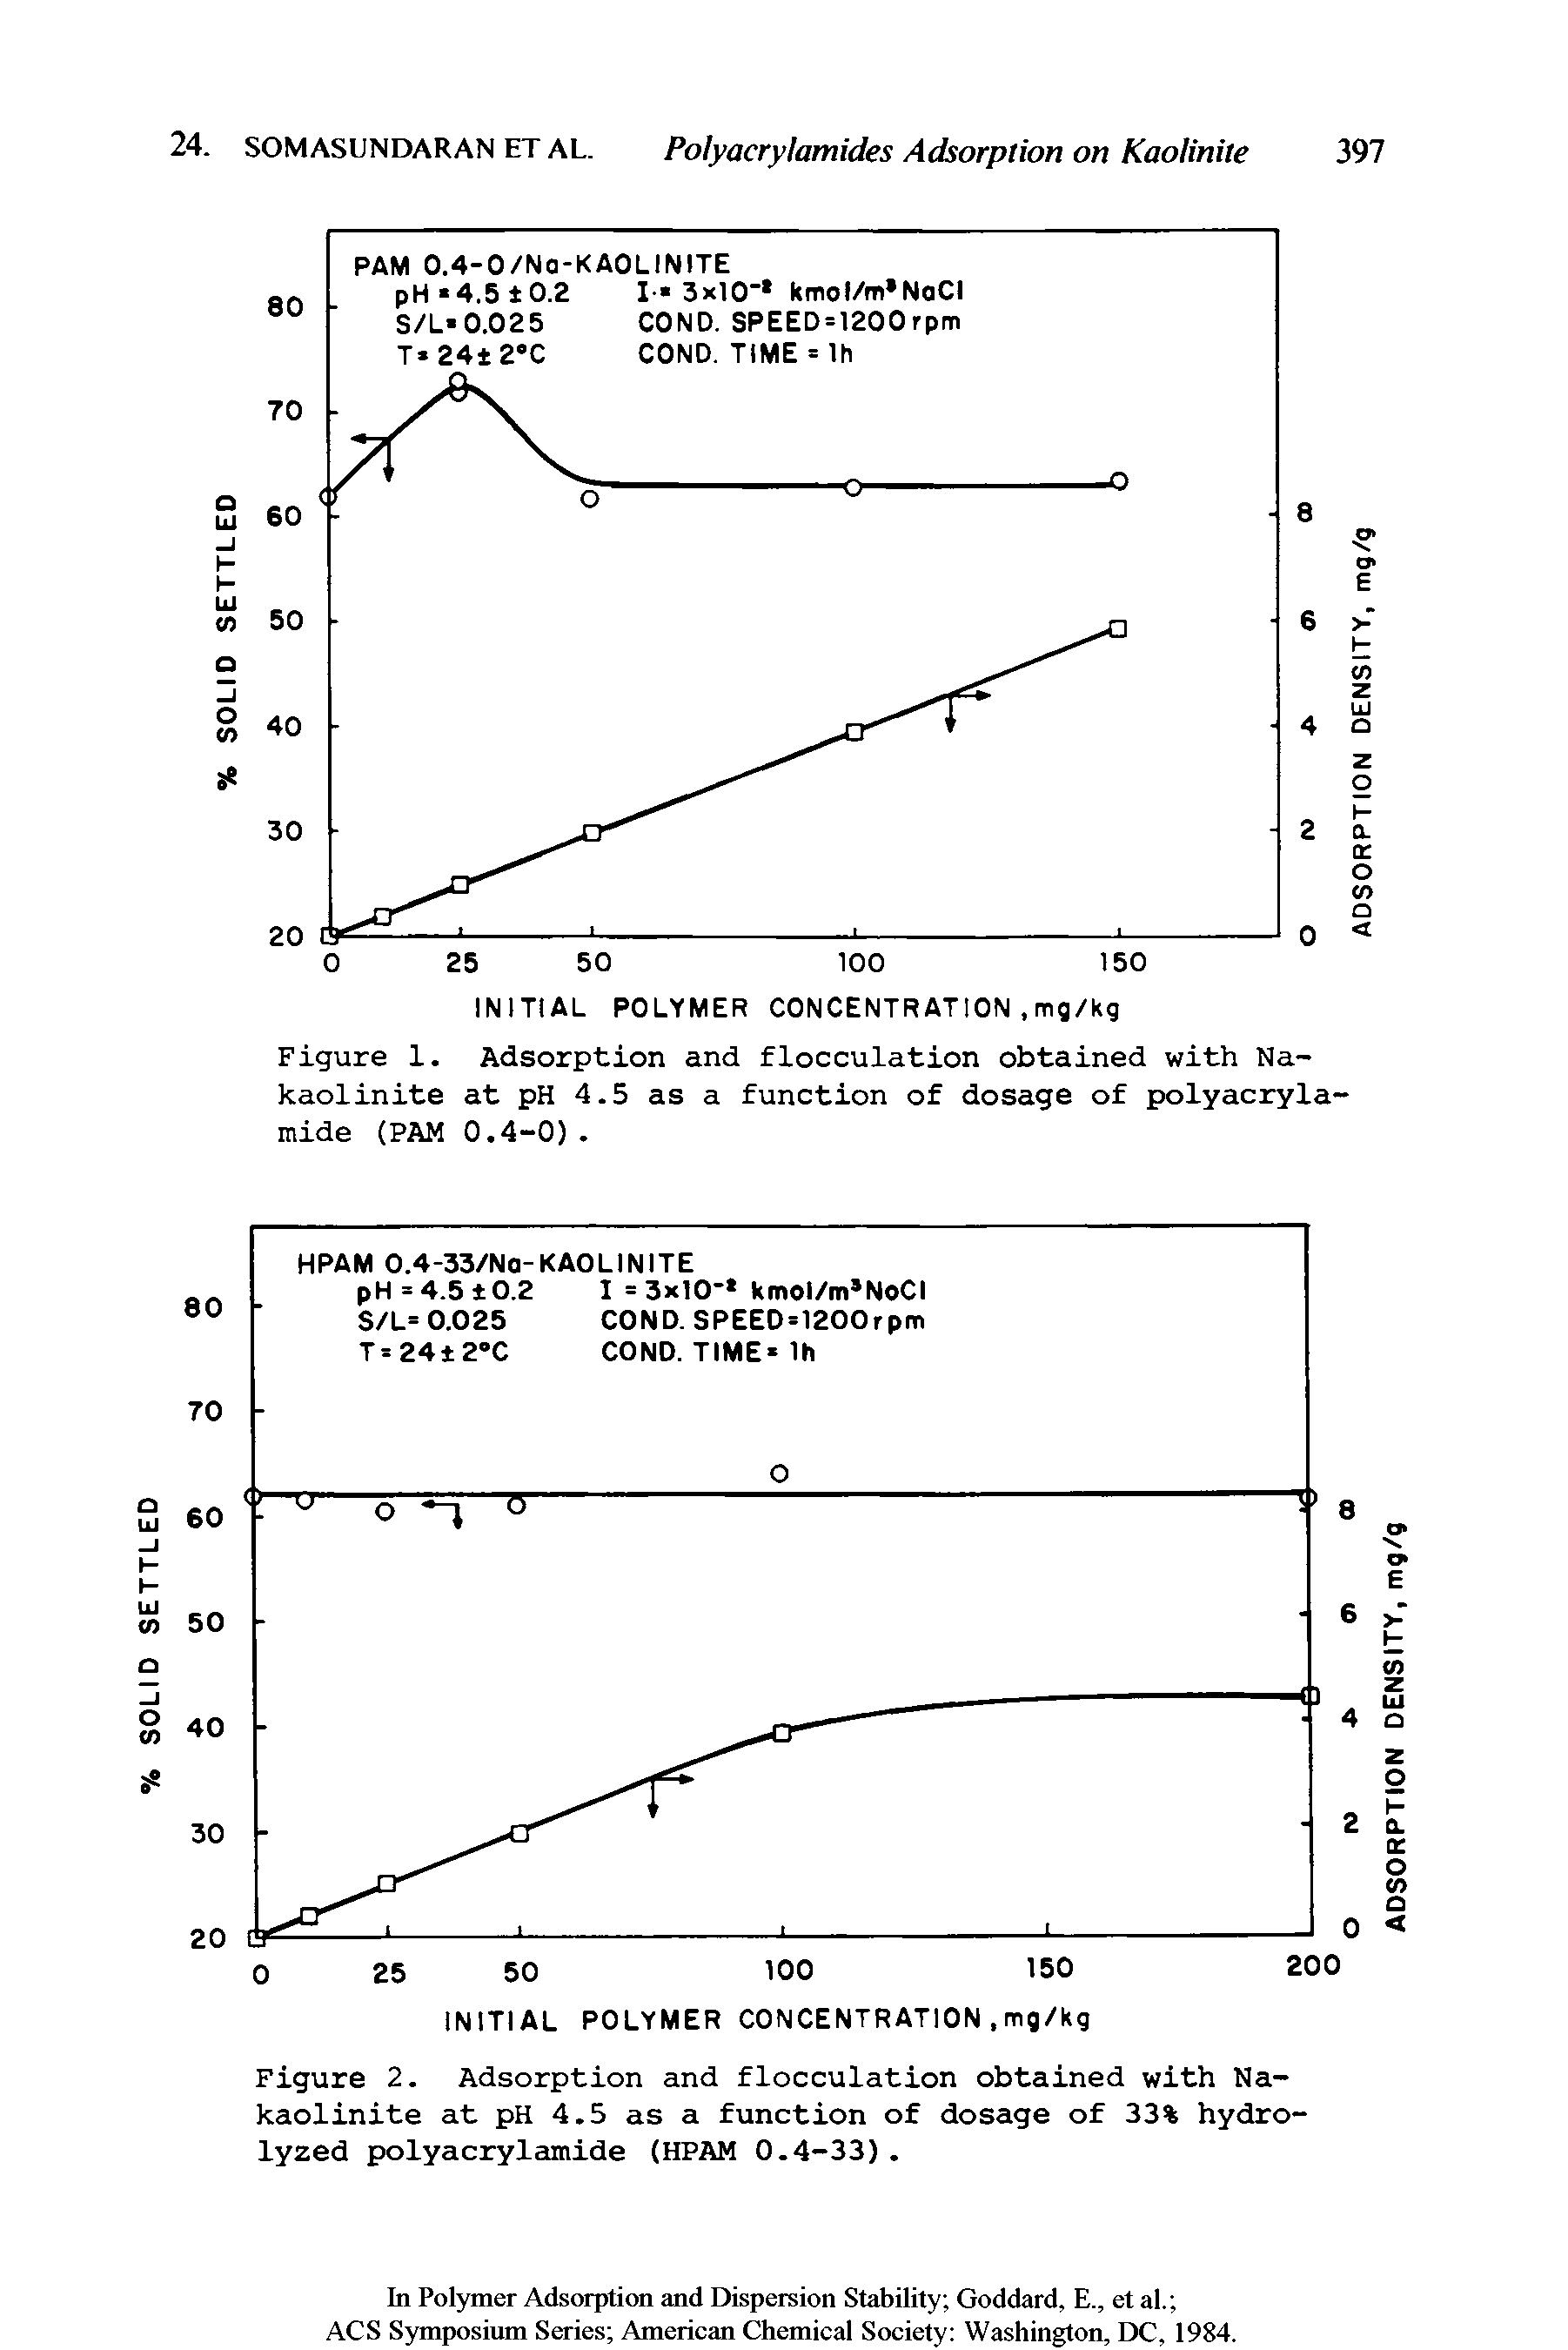 Figure 1. Adsorption and flocculation obtained with Na-kaolinite at pH 4.5 as a function of dosage of polyacrylamide (PAM 0.4-0).